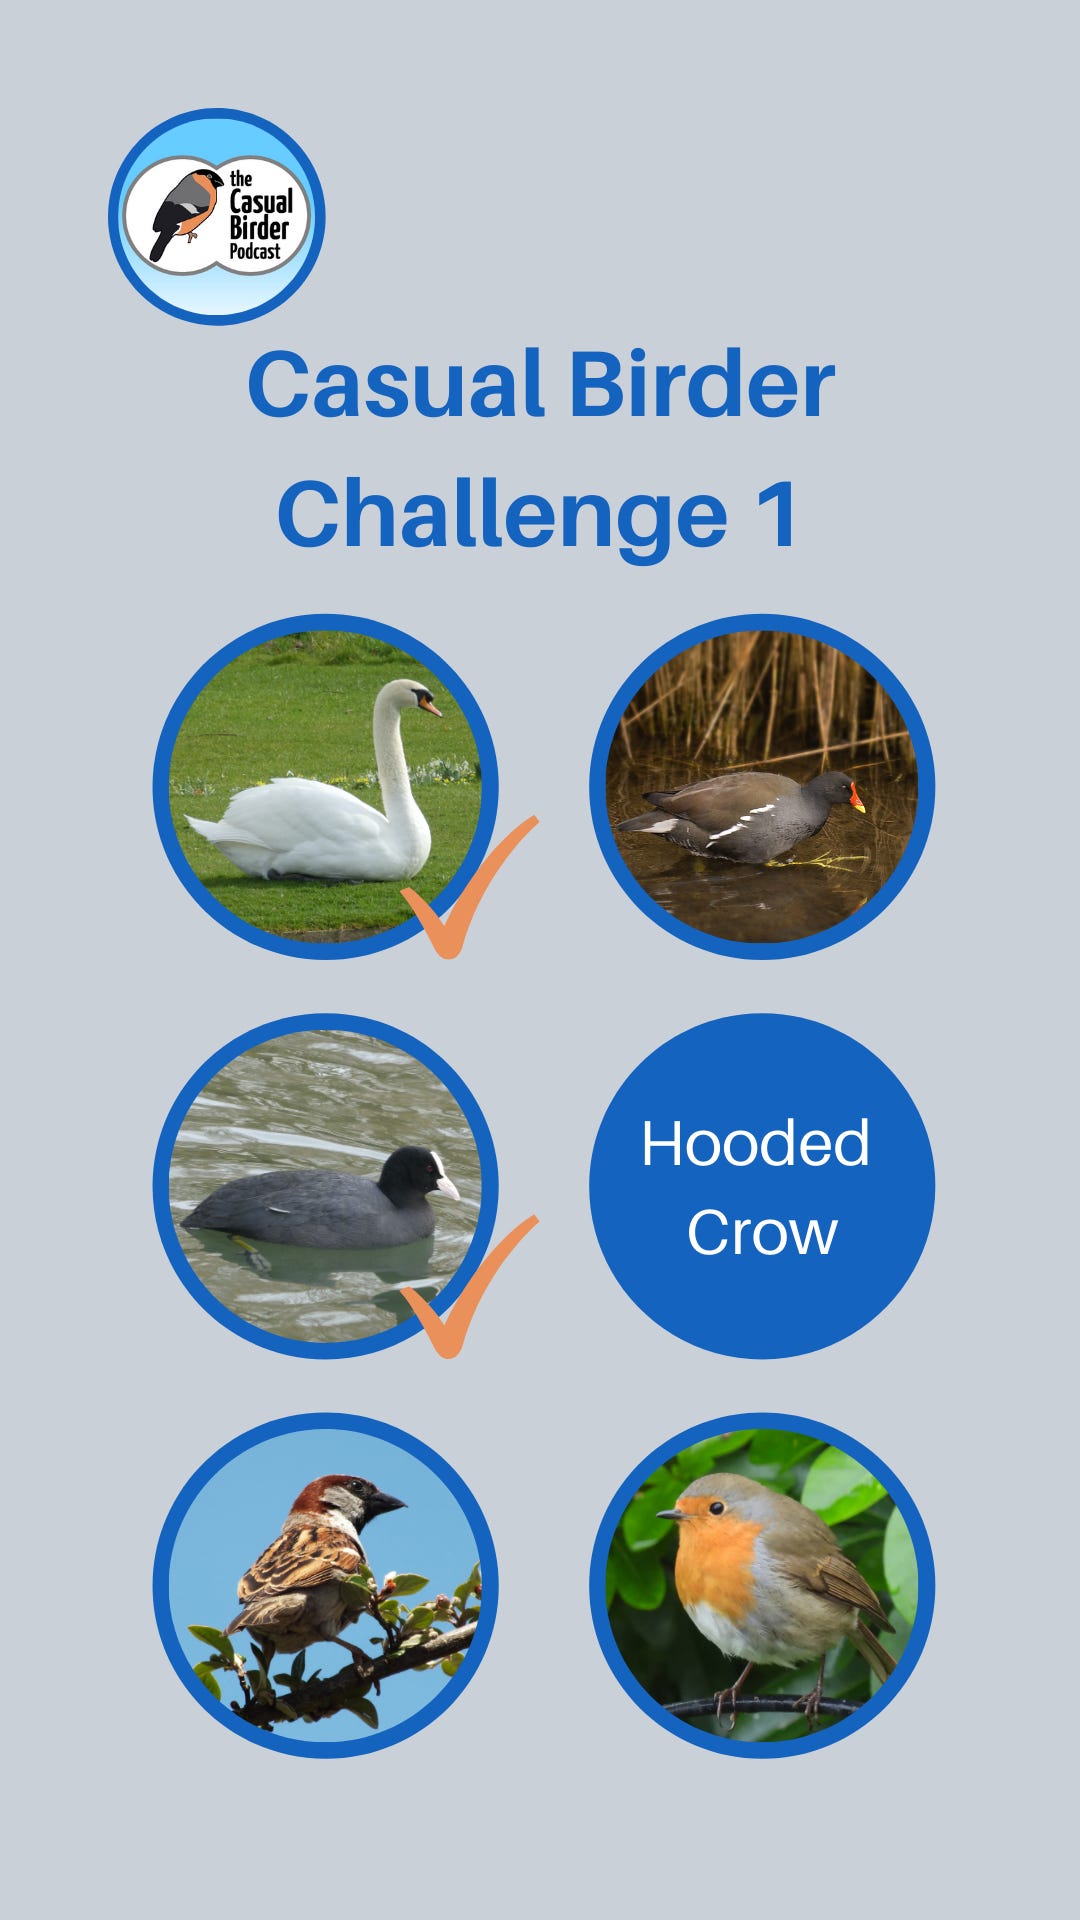 Card for Instagram stories showing photos of 5 of the 6 target birds, plus the name of the sixth (Hooded Crow)